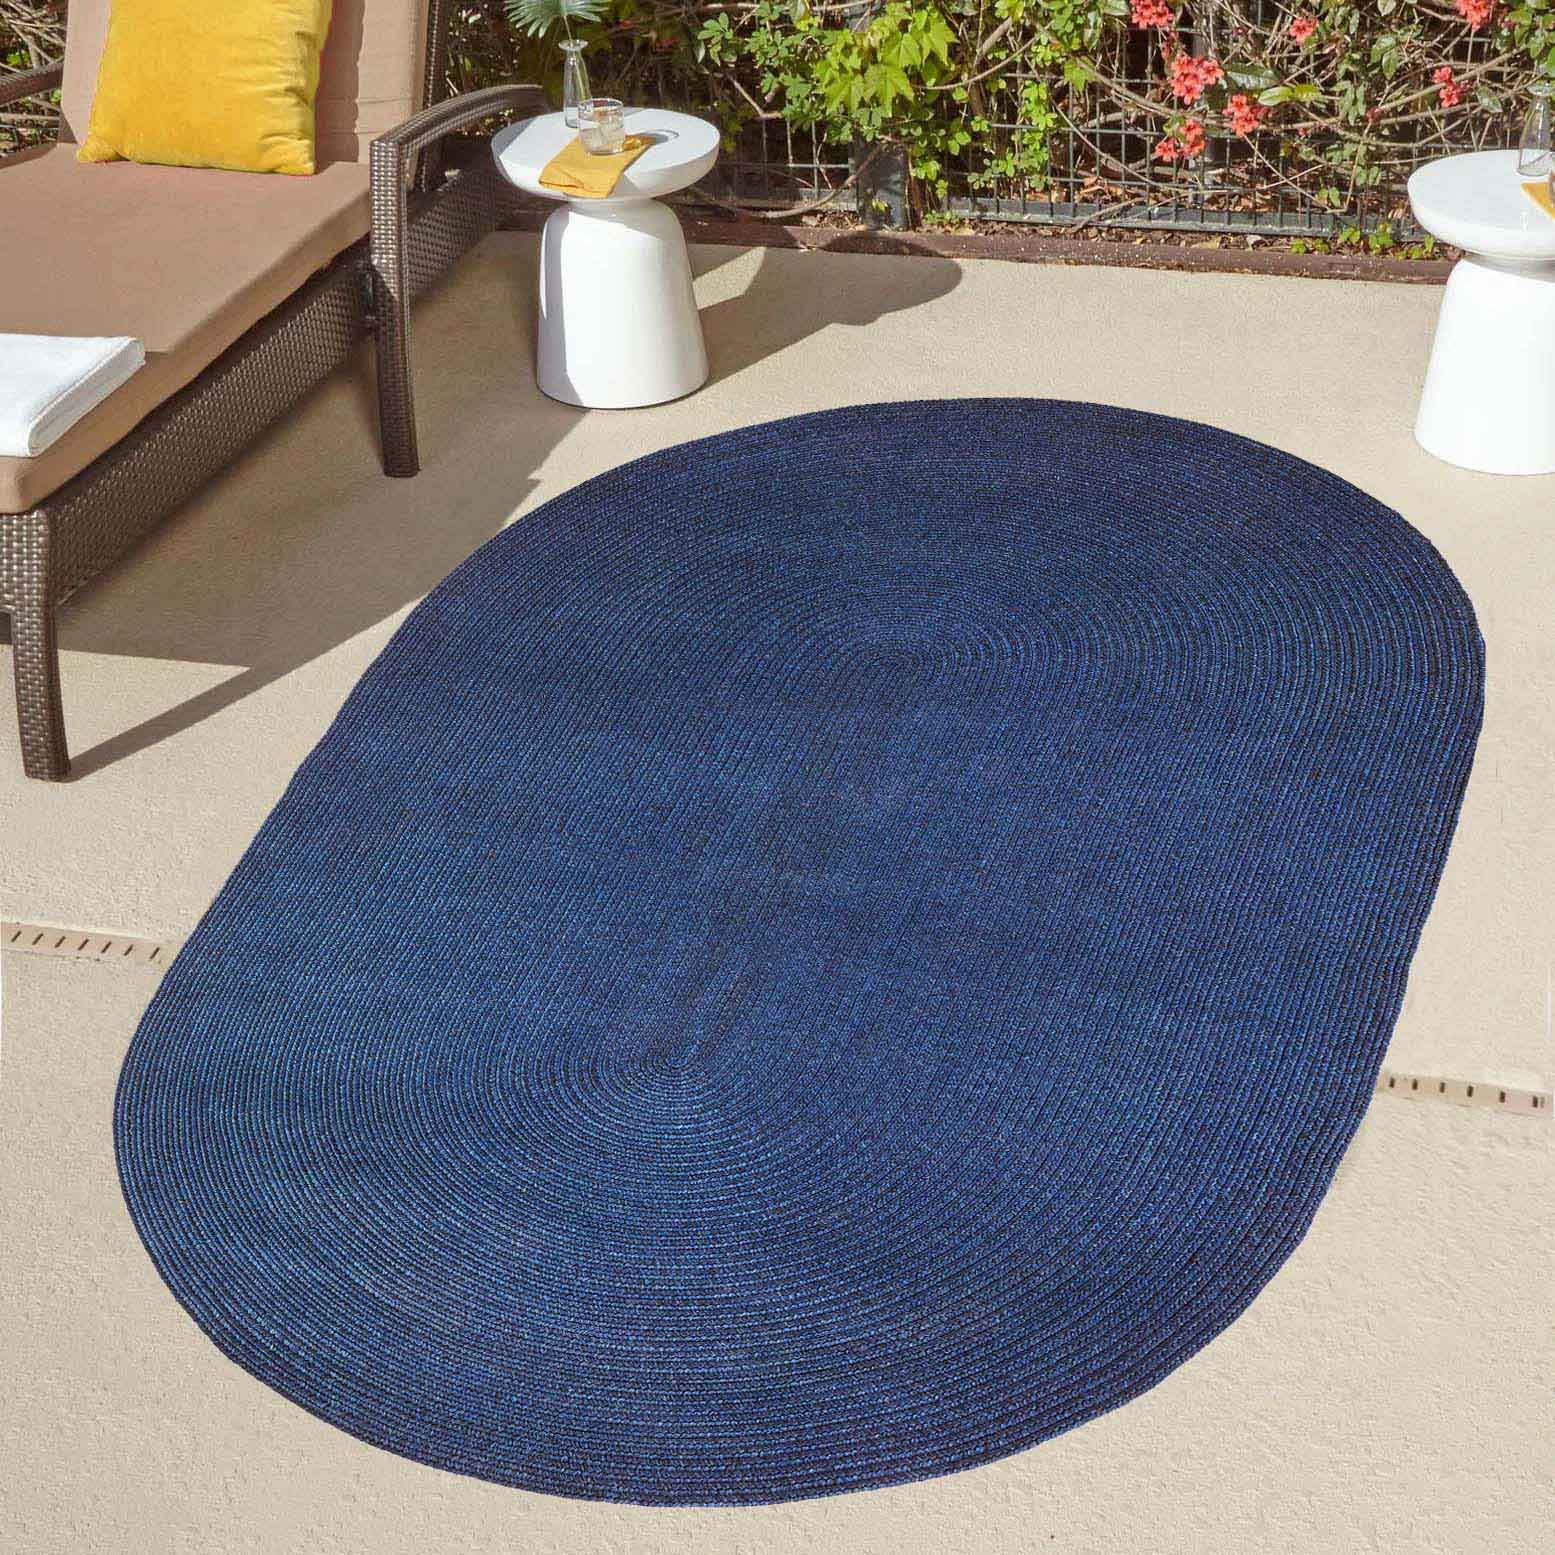 Classic Braided Weave Oval Area Rug Indoor Outdoor Rugs - DenimBlue